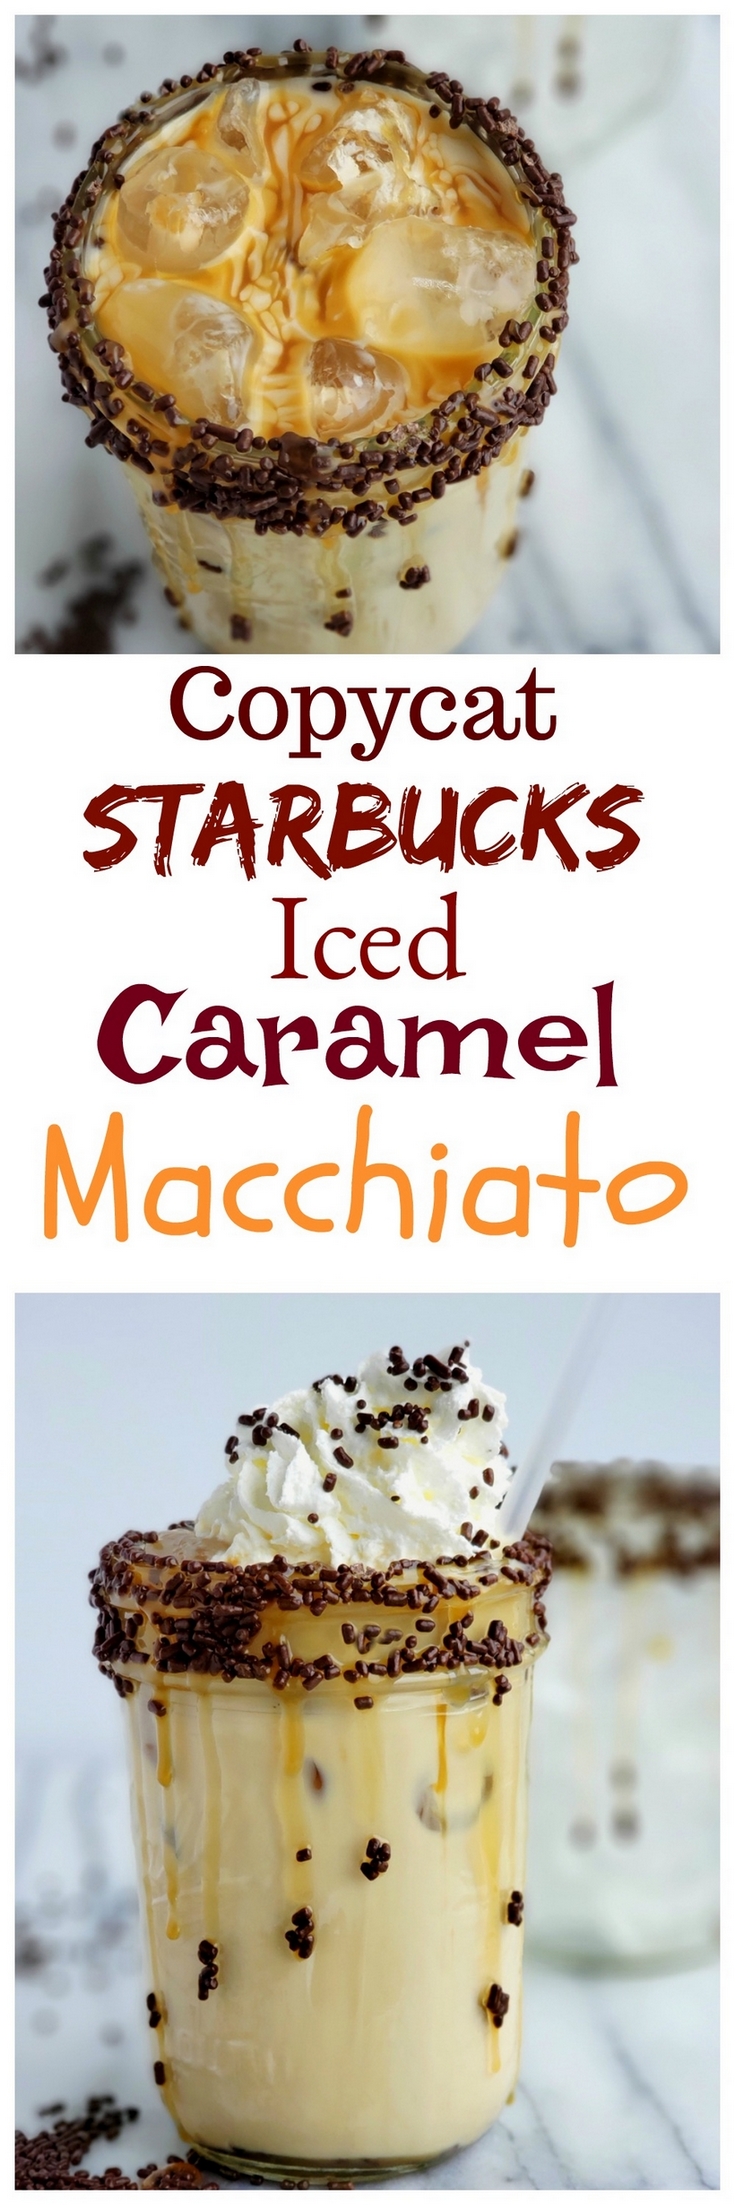 Save yourself a ton of money by preparing this Copycat Starbucks Iced Caramel Macchiato at home. It's so easy to put together with just a few basic ingredients. #noblepig #copycat #starbucks #macchiato  via @cmpollak1